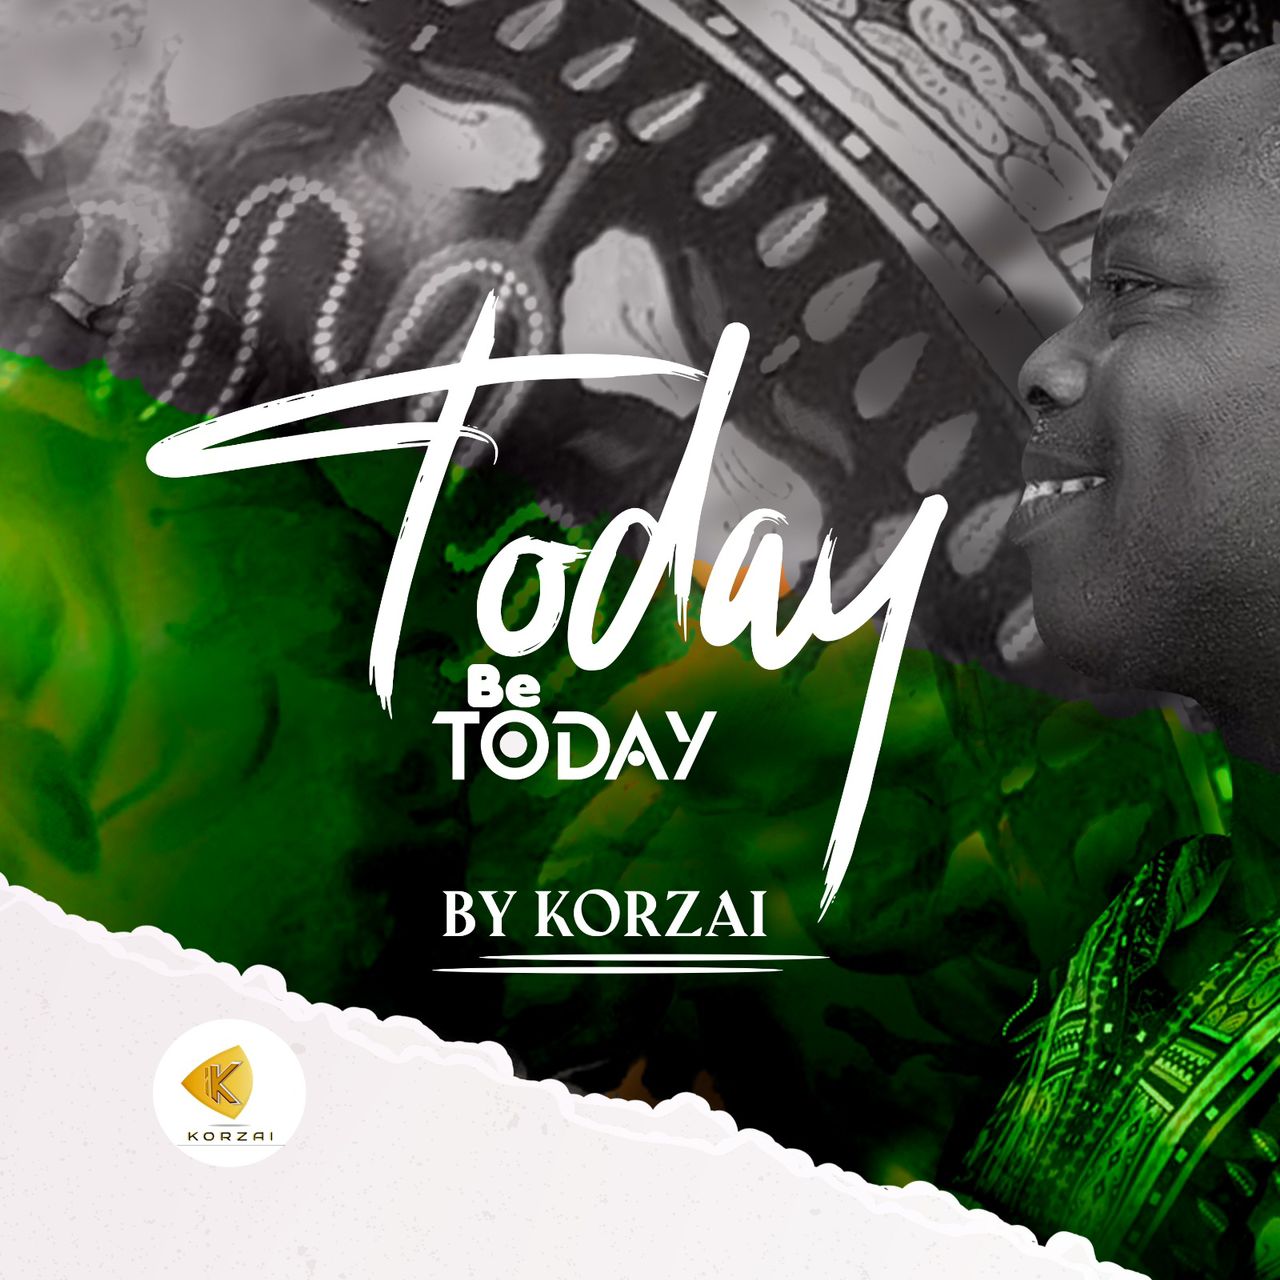 Korzai Releases Inspirational New Single “Today Be Today”